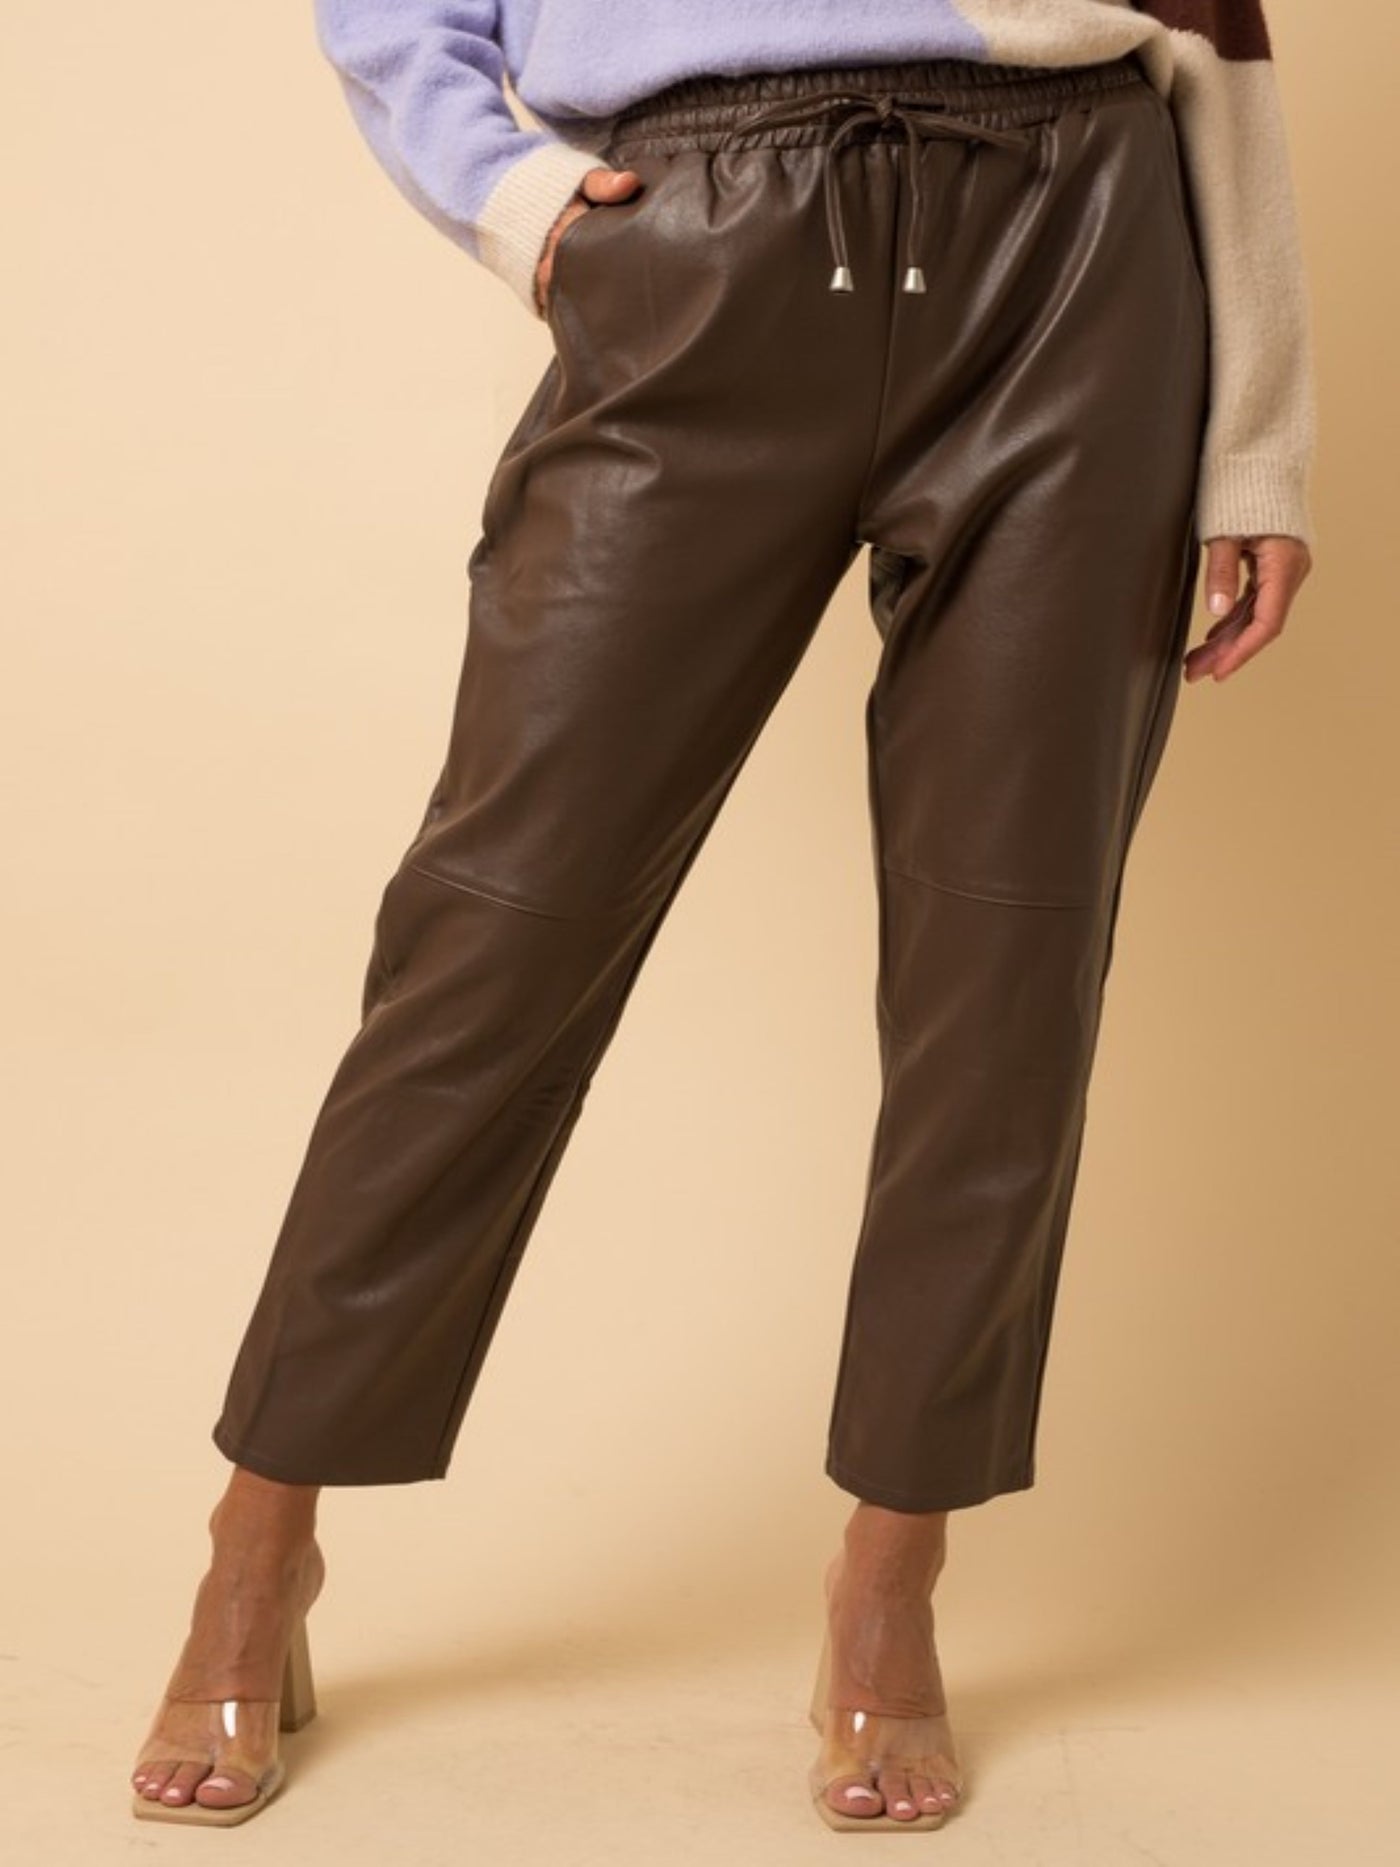 Next Level Faux Leather Chocolate Pants